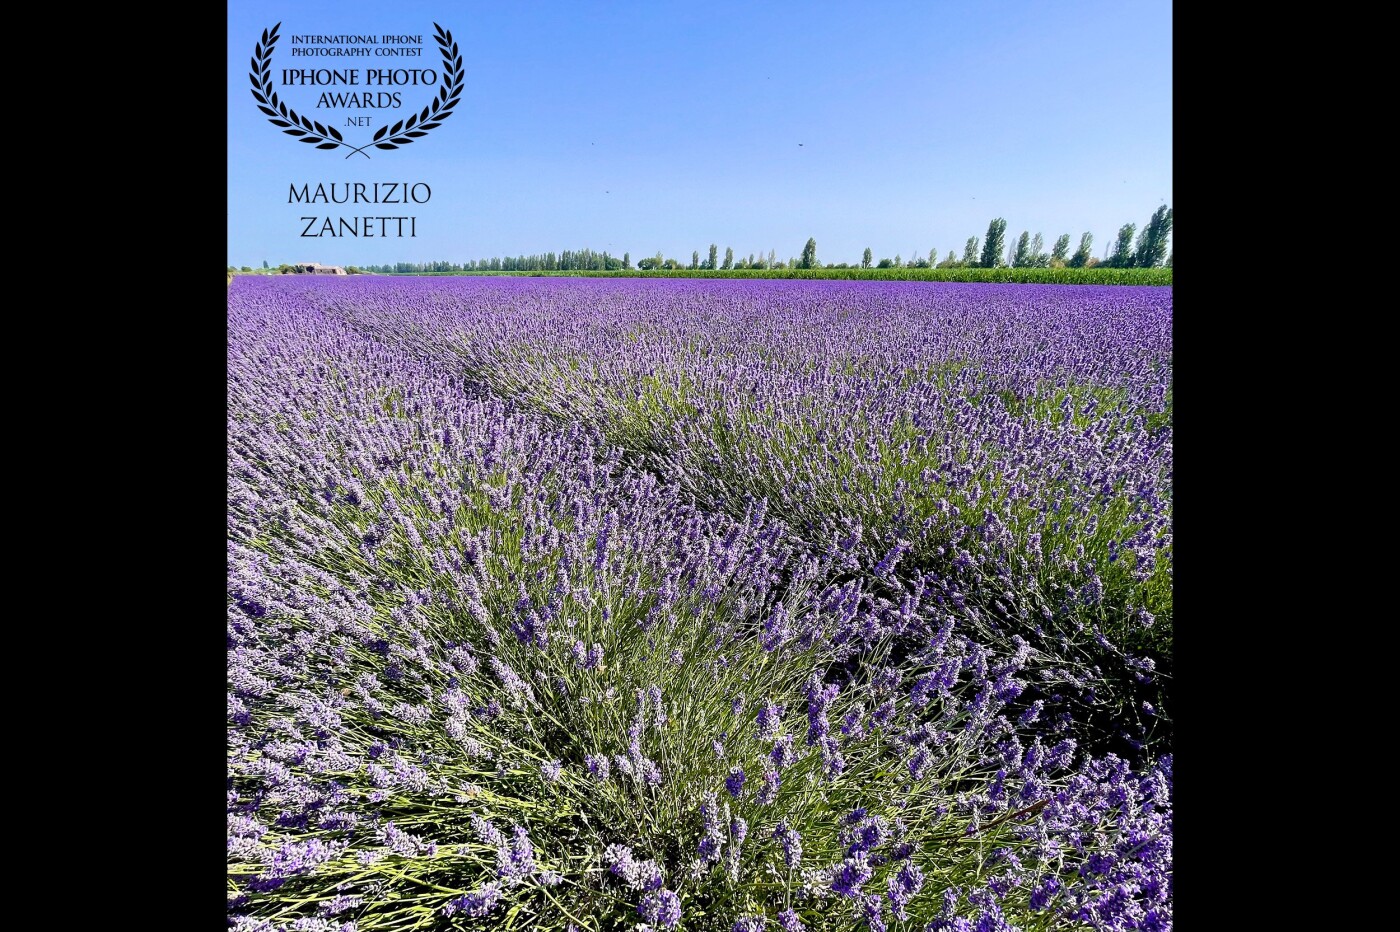 In the heart of the Po Delta, in the Ca Mello area, small marvelous cultivation of lavender. The photo can return the color, not the wonder of discovery and least of all the perfume.